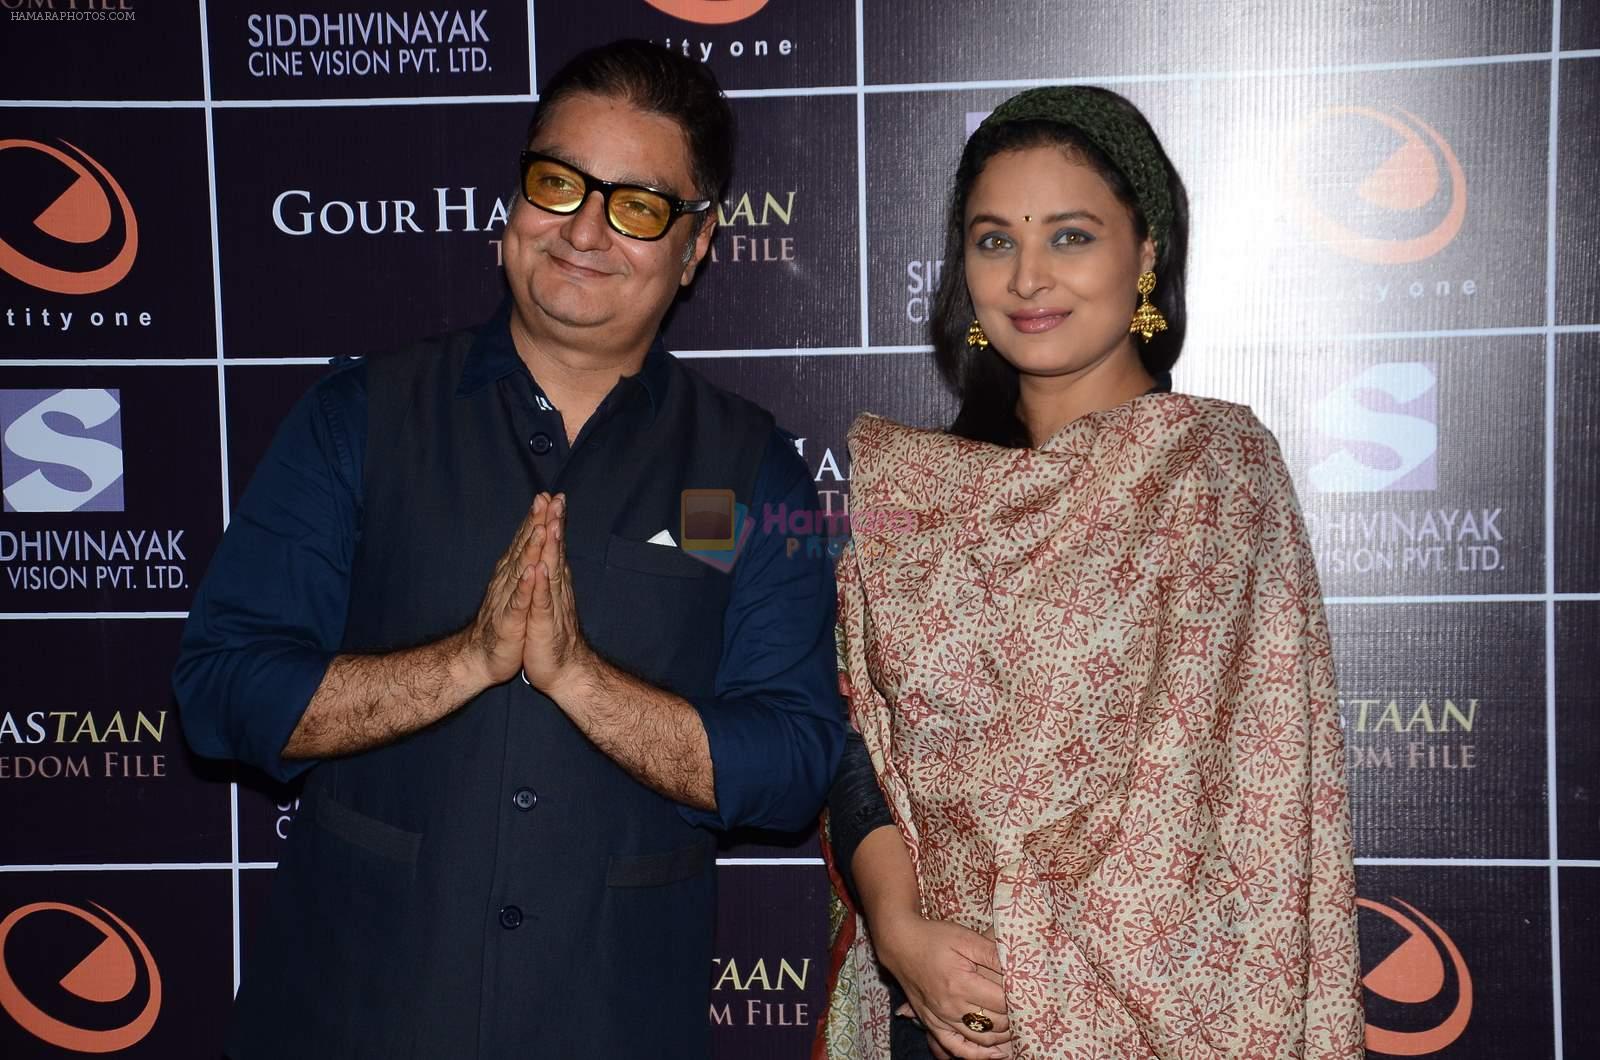 Vinay Pathak at the Premiere of the film Gour Hari Dastaan in PVR, Juhu on 12th Aug 2015